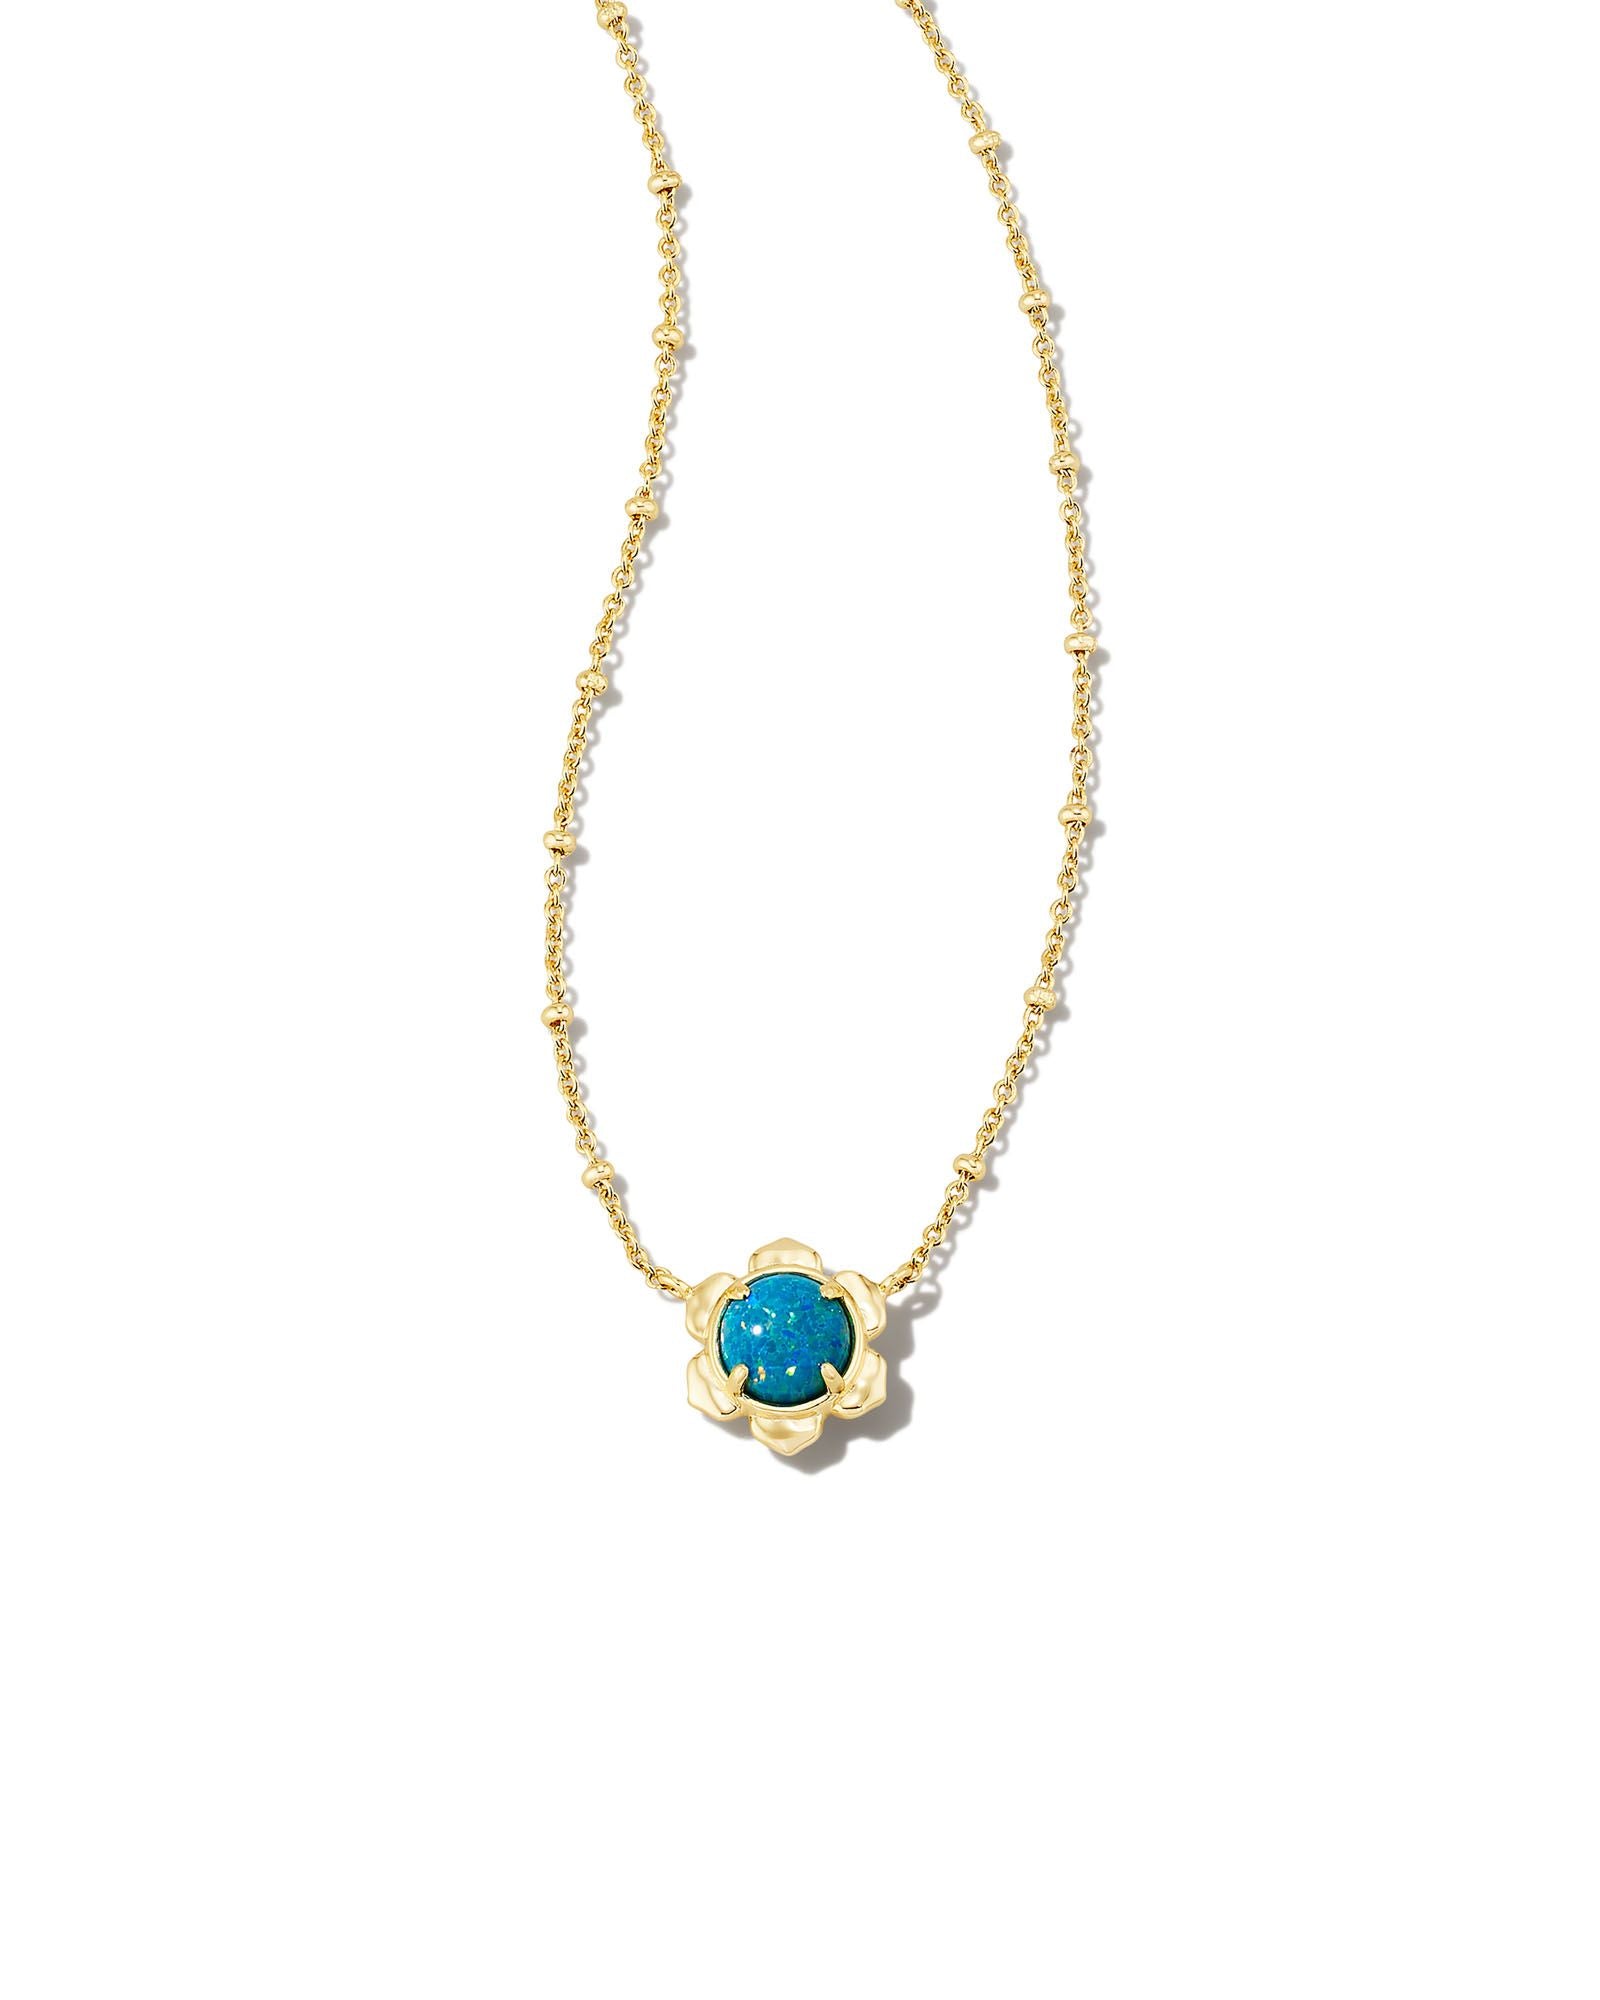 A Kendra Scott Susie Short Pendant Necklace in Gold Marine.